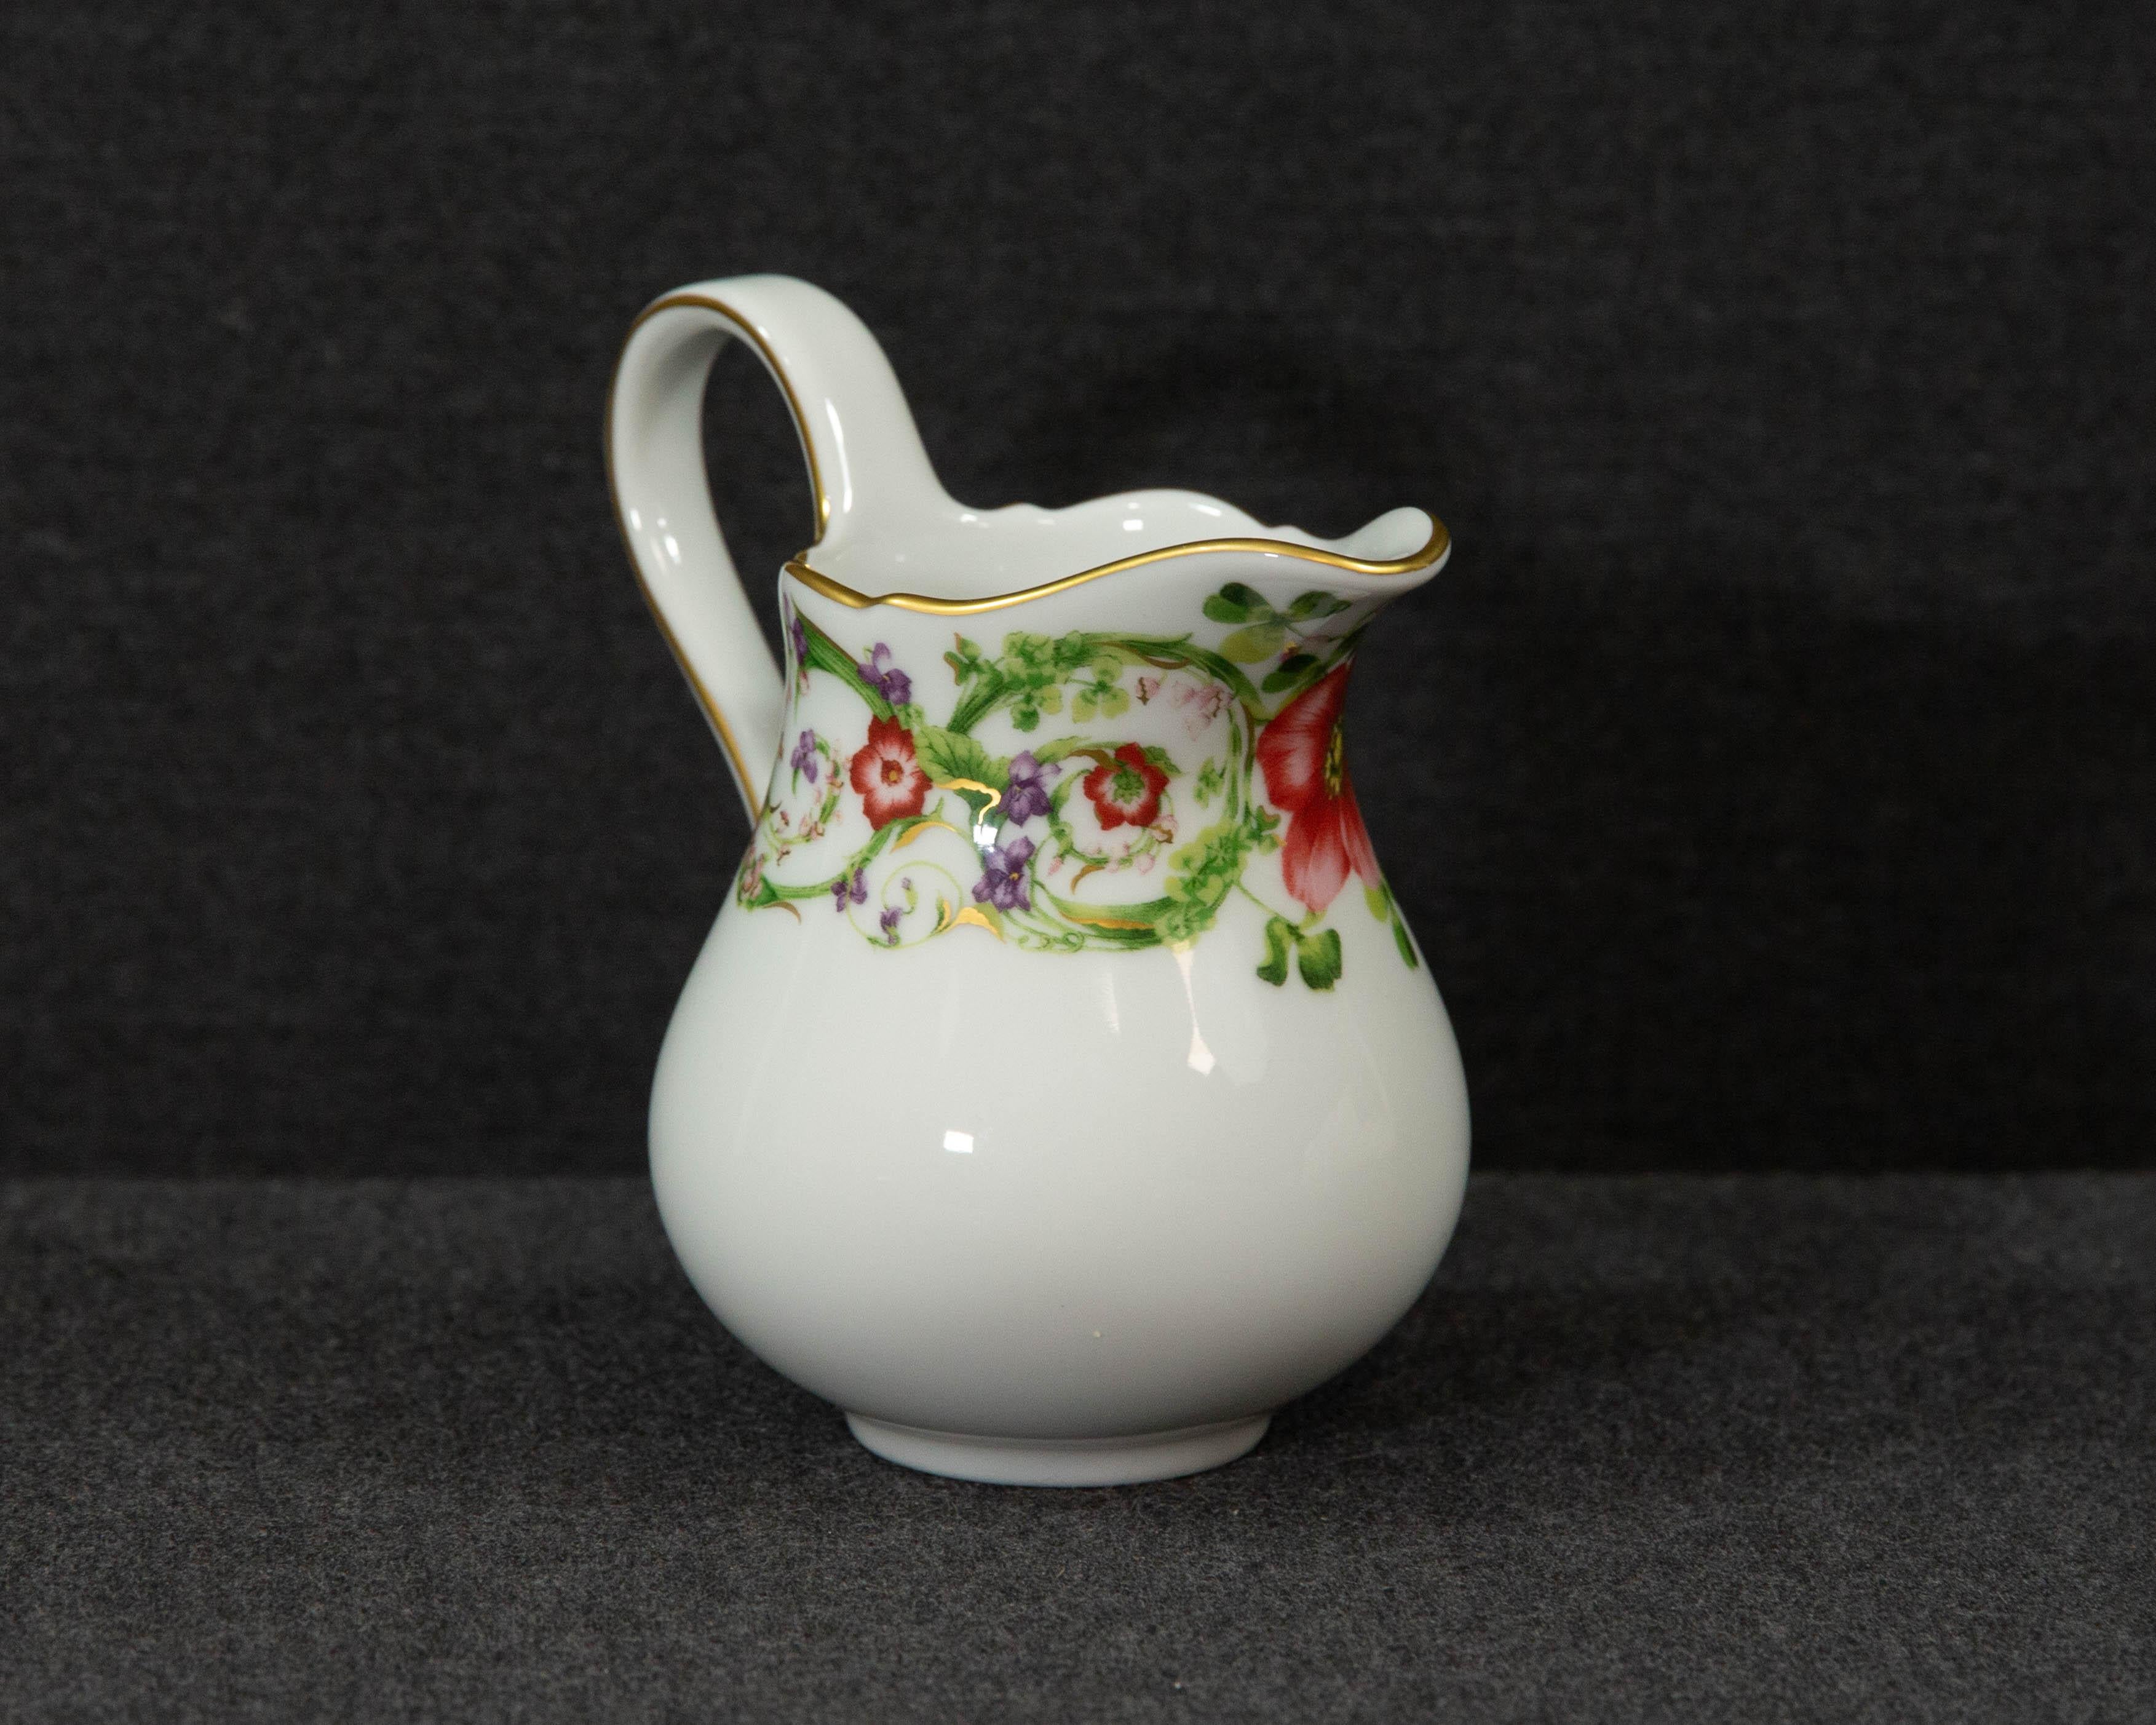 A creamer made by Rosenthal belonging to the series flower fantasy, designed by Versace.

The design was inspired by a floral pattern from Versace's fashion archives. The series is decorated with attractive sprays of foliage and flowers